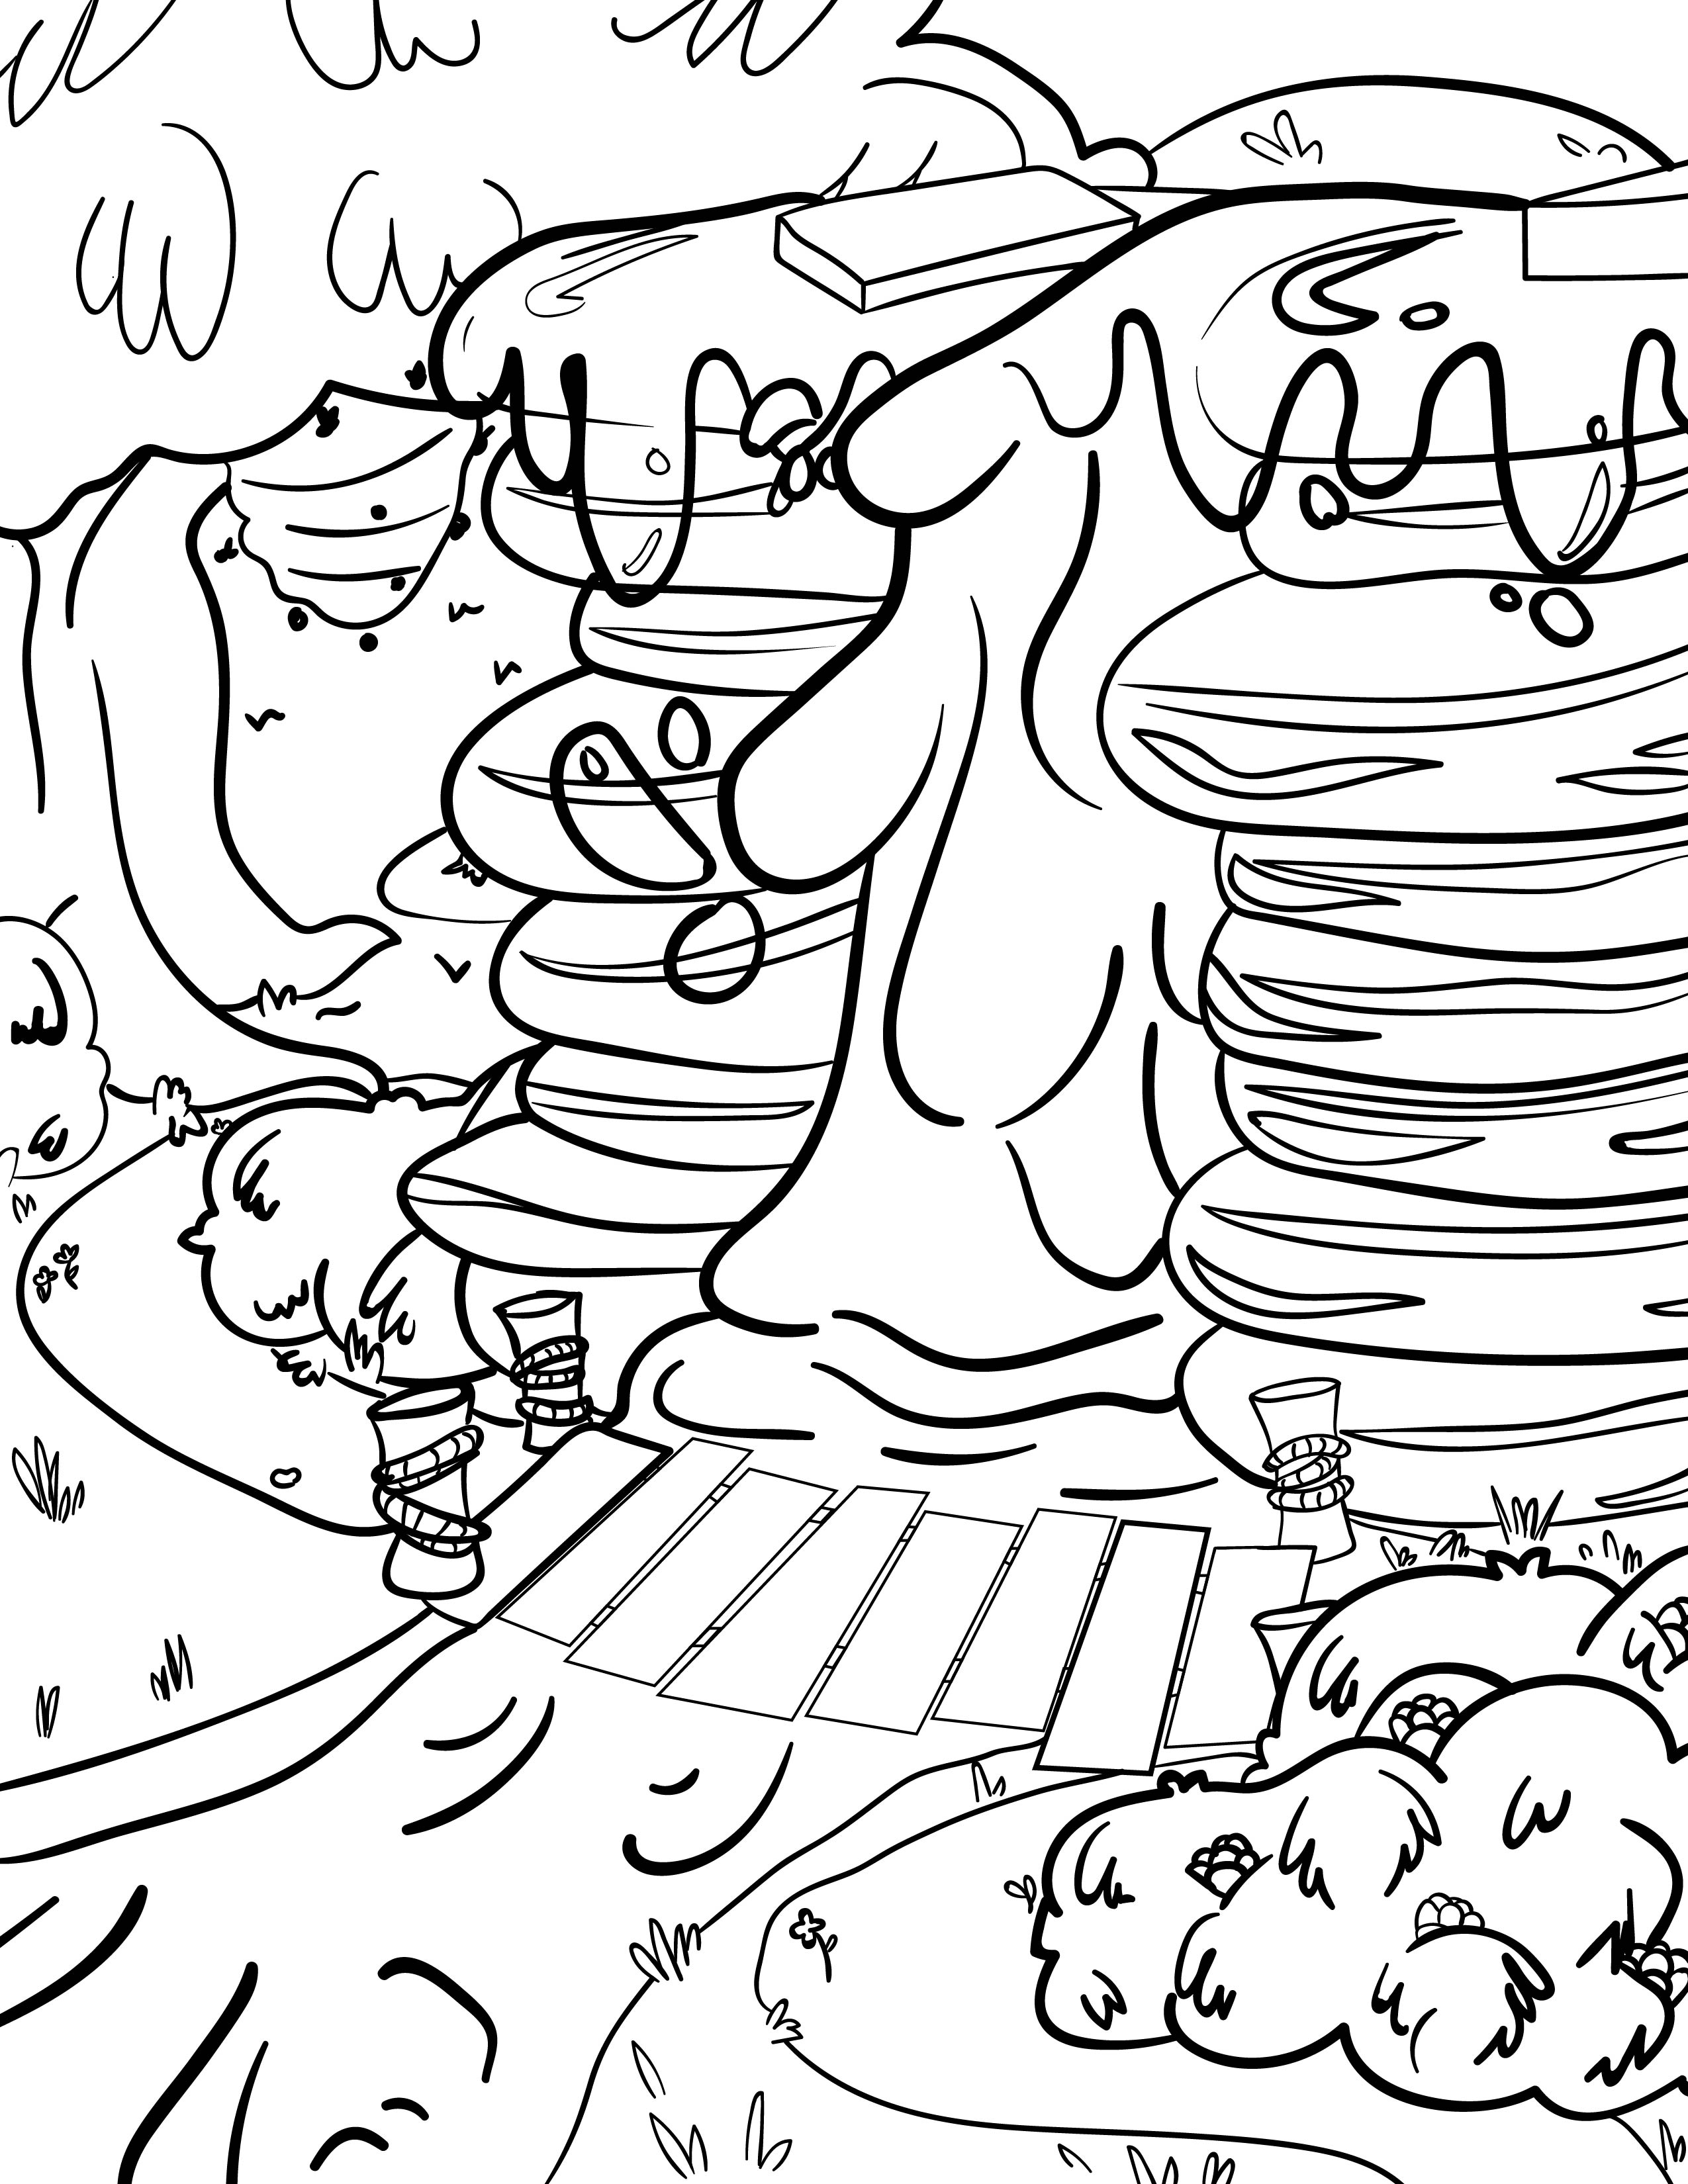 Activity and Coloring Pages - Waffle Smash: Chicken & Waffles